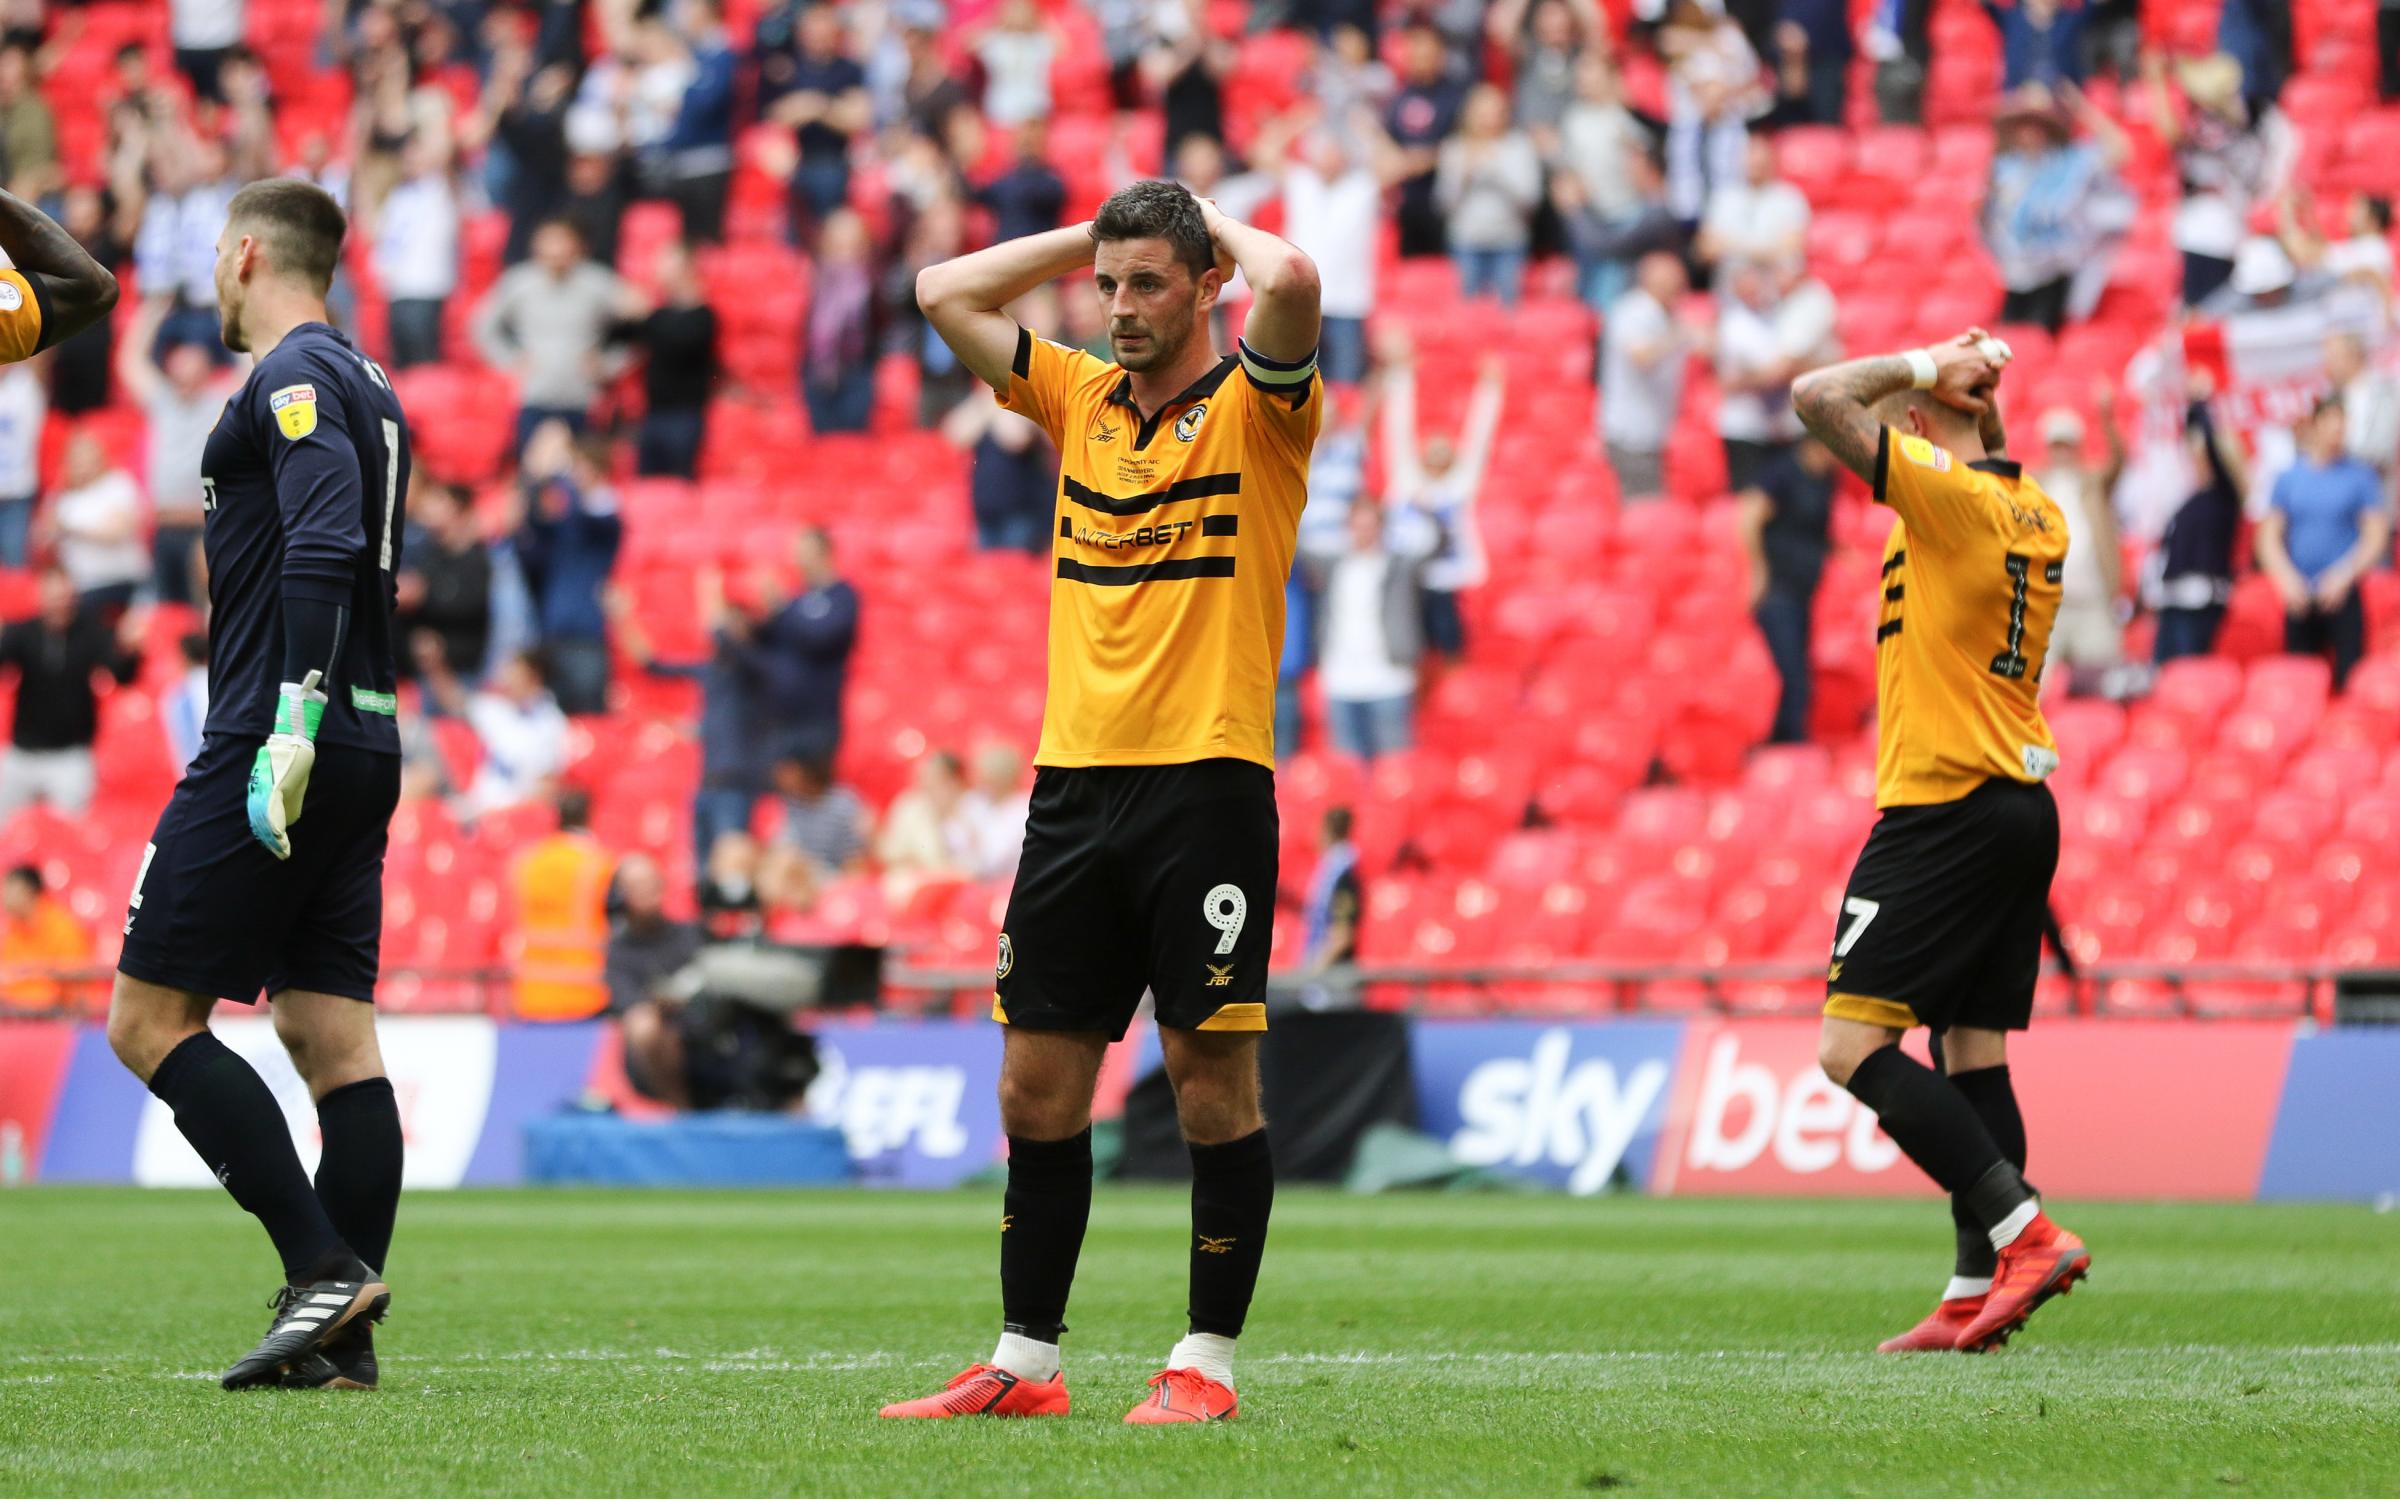 25.05.19 - Newport County v Tranmere Rovers, Sky Bet League 2 Play-Off Final - Padraig Amond of Newport County reacts on the final whistle as his team lose to Tranmere Rovers in the League 2 Play Off Final.